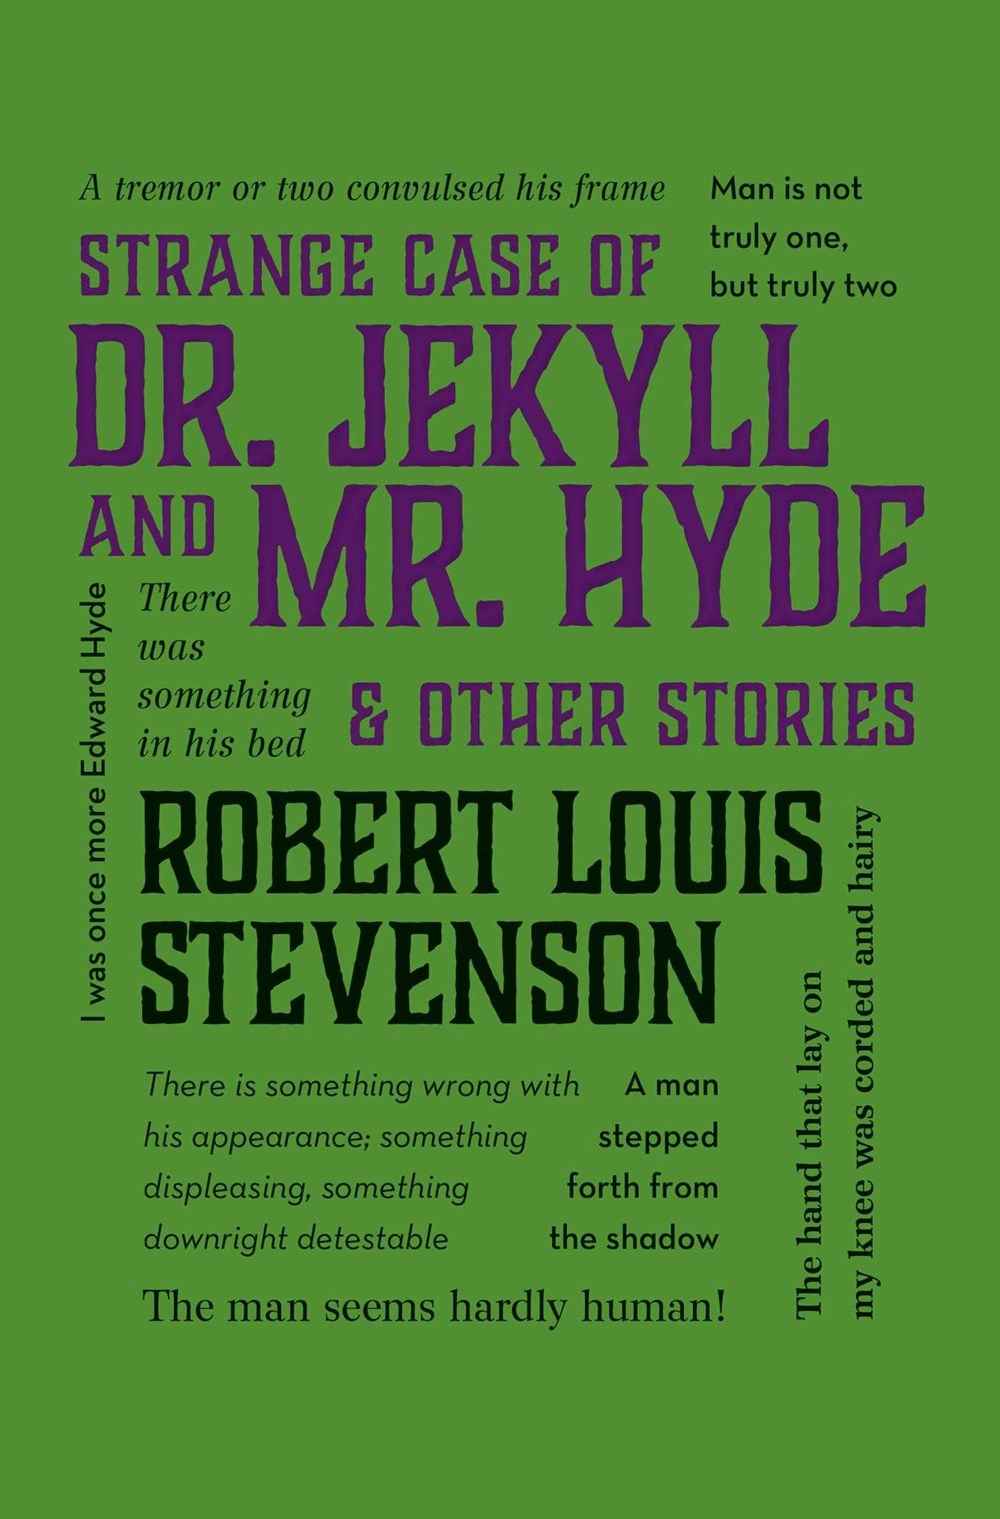 The Strange Case of Dr Jekyll and Mr Hyde, and other Stories